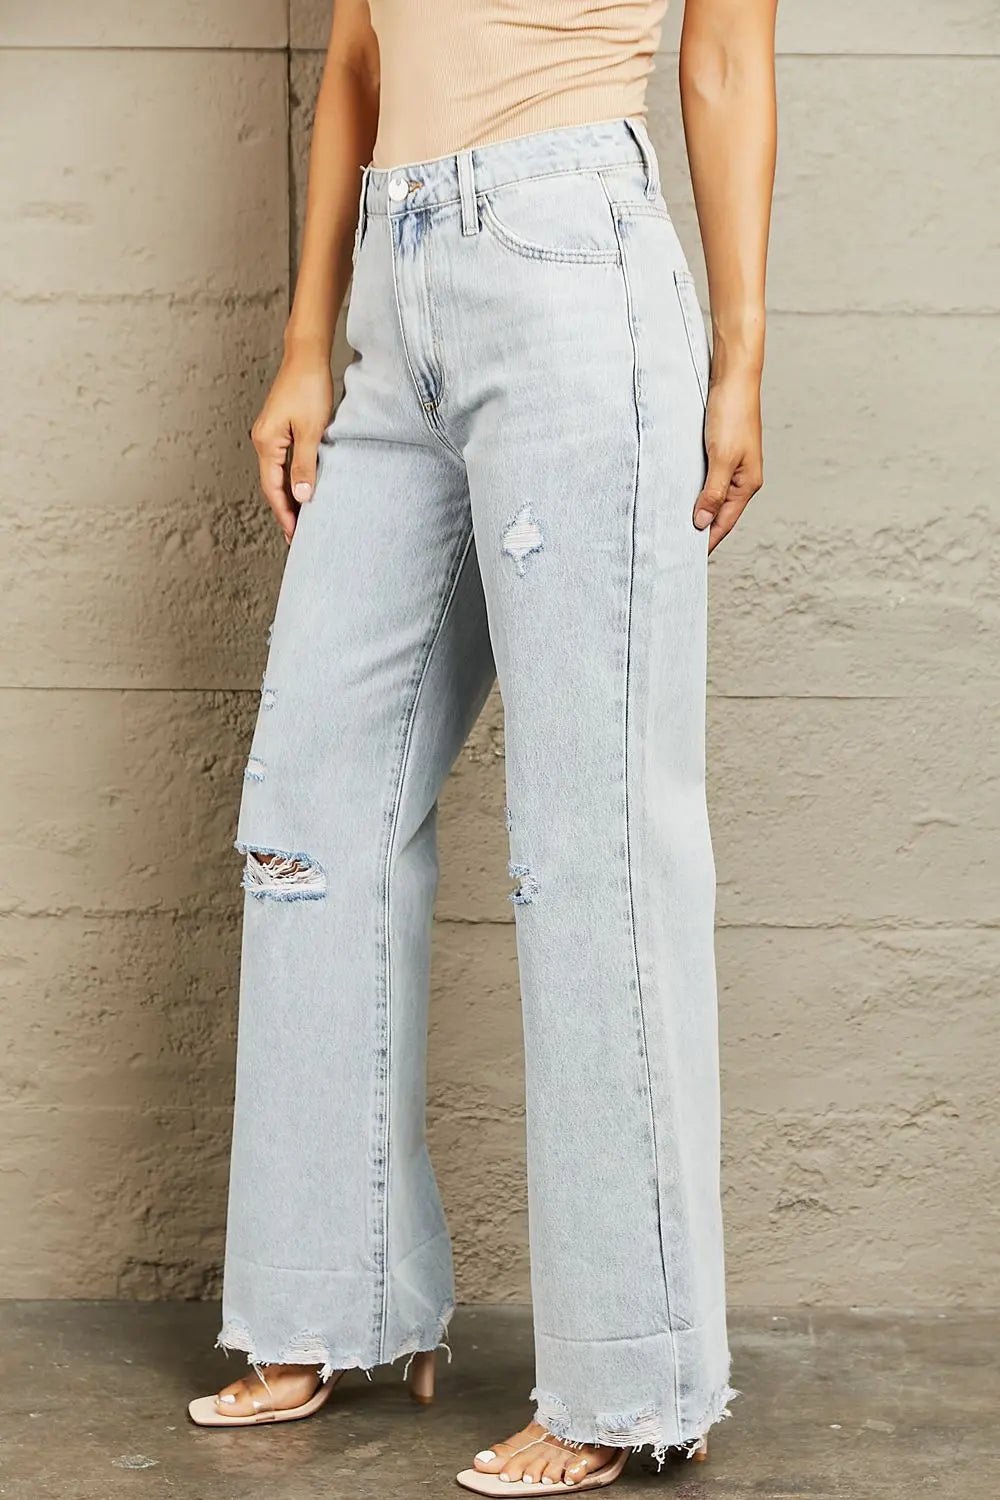 HIGH WAISTED WIDE LEG TROUSERS LOOSE FIT JEANS - MeadeuxHIGH WAISTED WIDE LEG TROUSERS LOOSE FIT JEANSJeansMeadeux